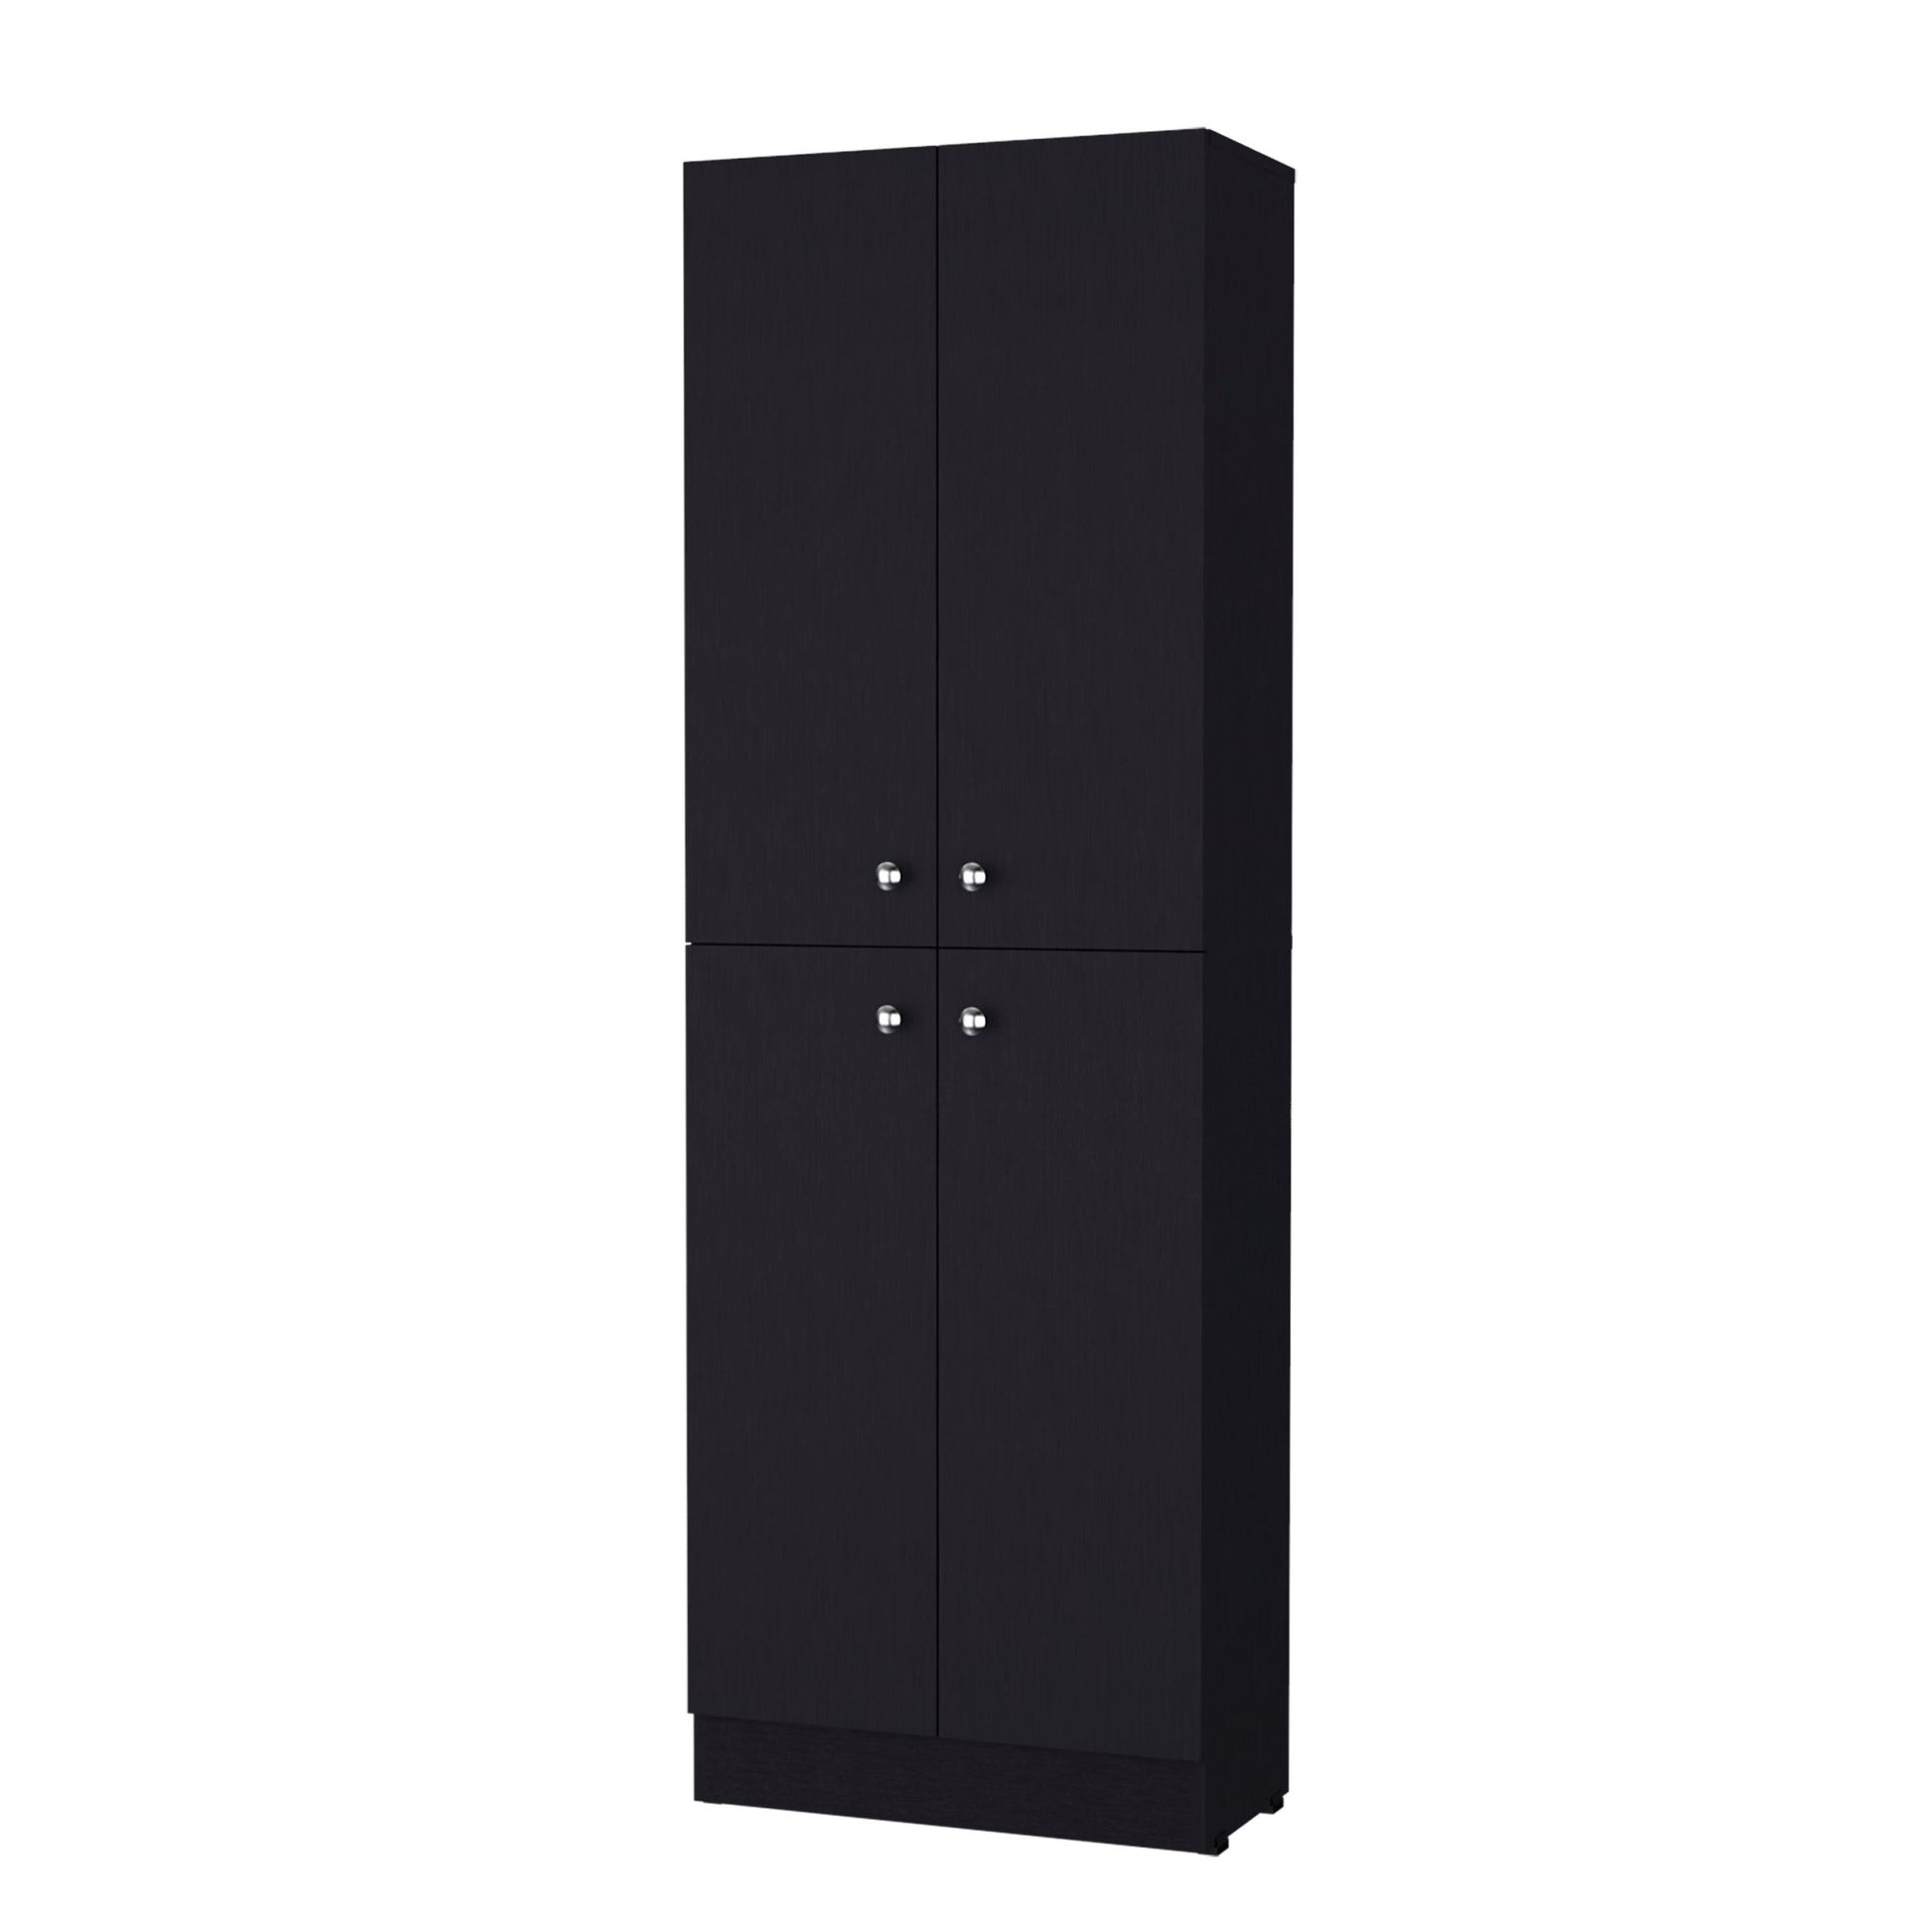 Cameron Pantry Cabinet With 4 Doors And 5 Hidden